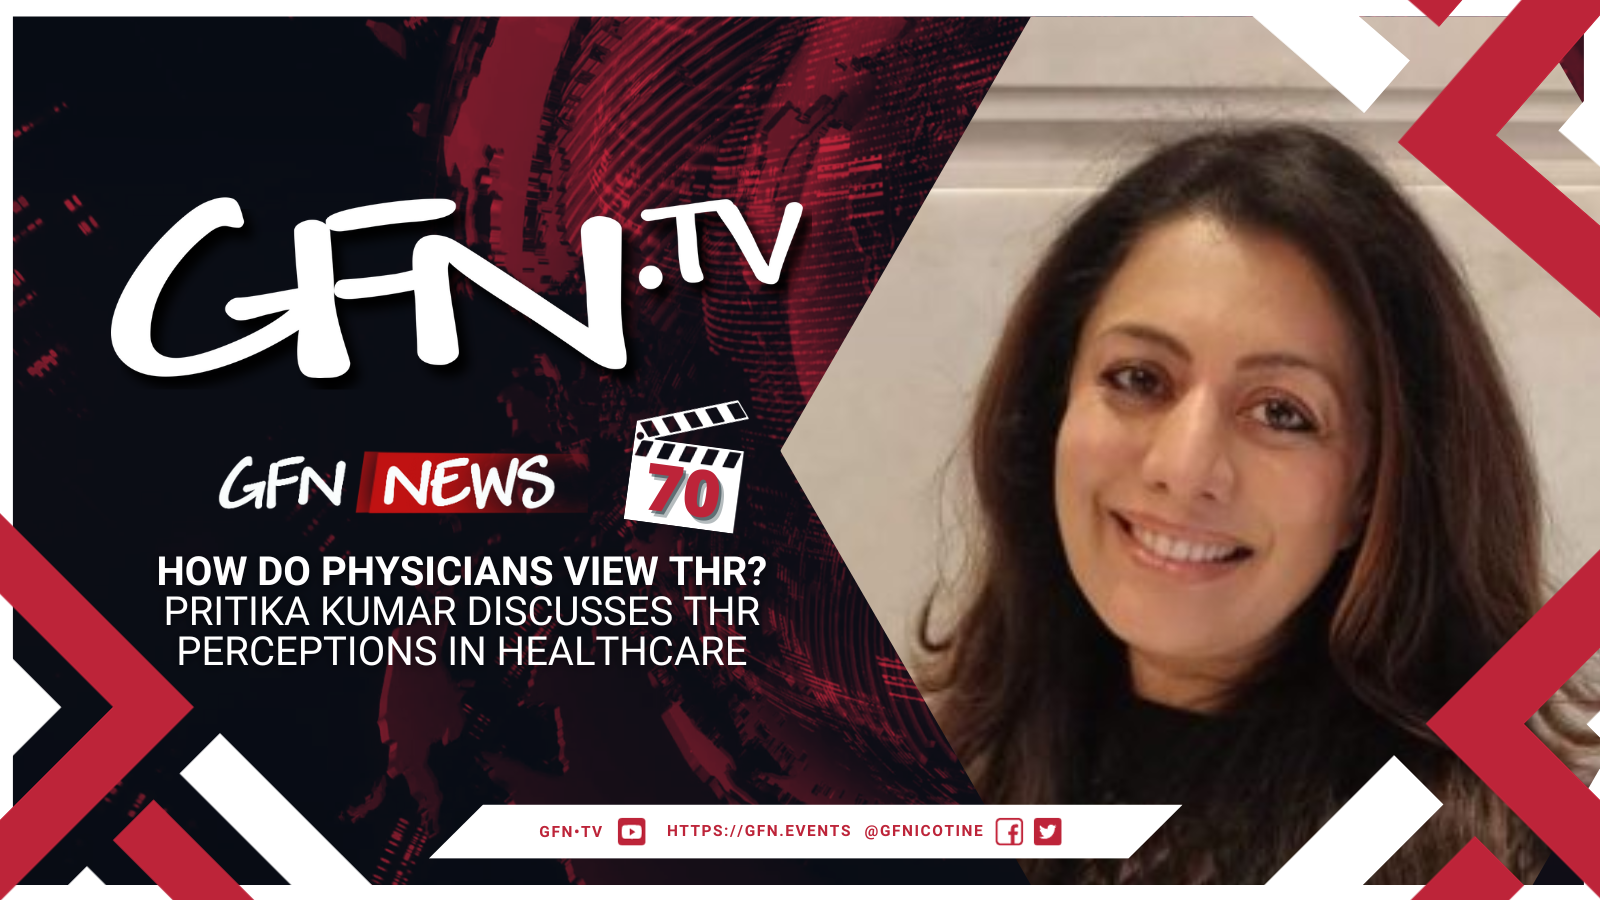 GFN News #70 | HOW DO PHYSICIANS VIEW THR? | Pritika Kumar discusses THR perceptions in healthcare